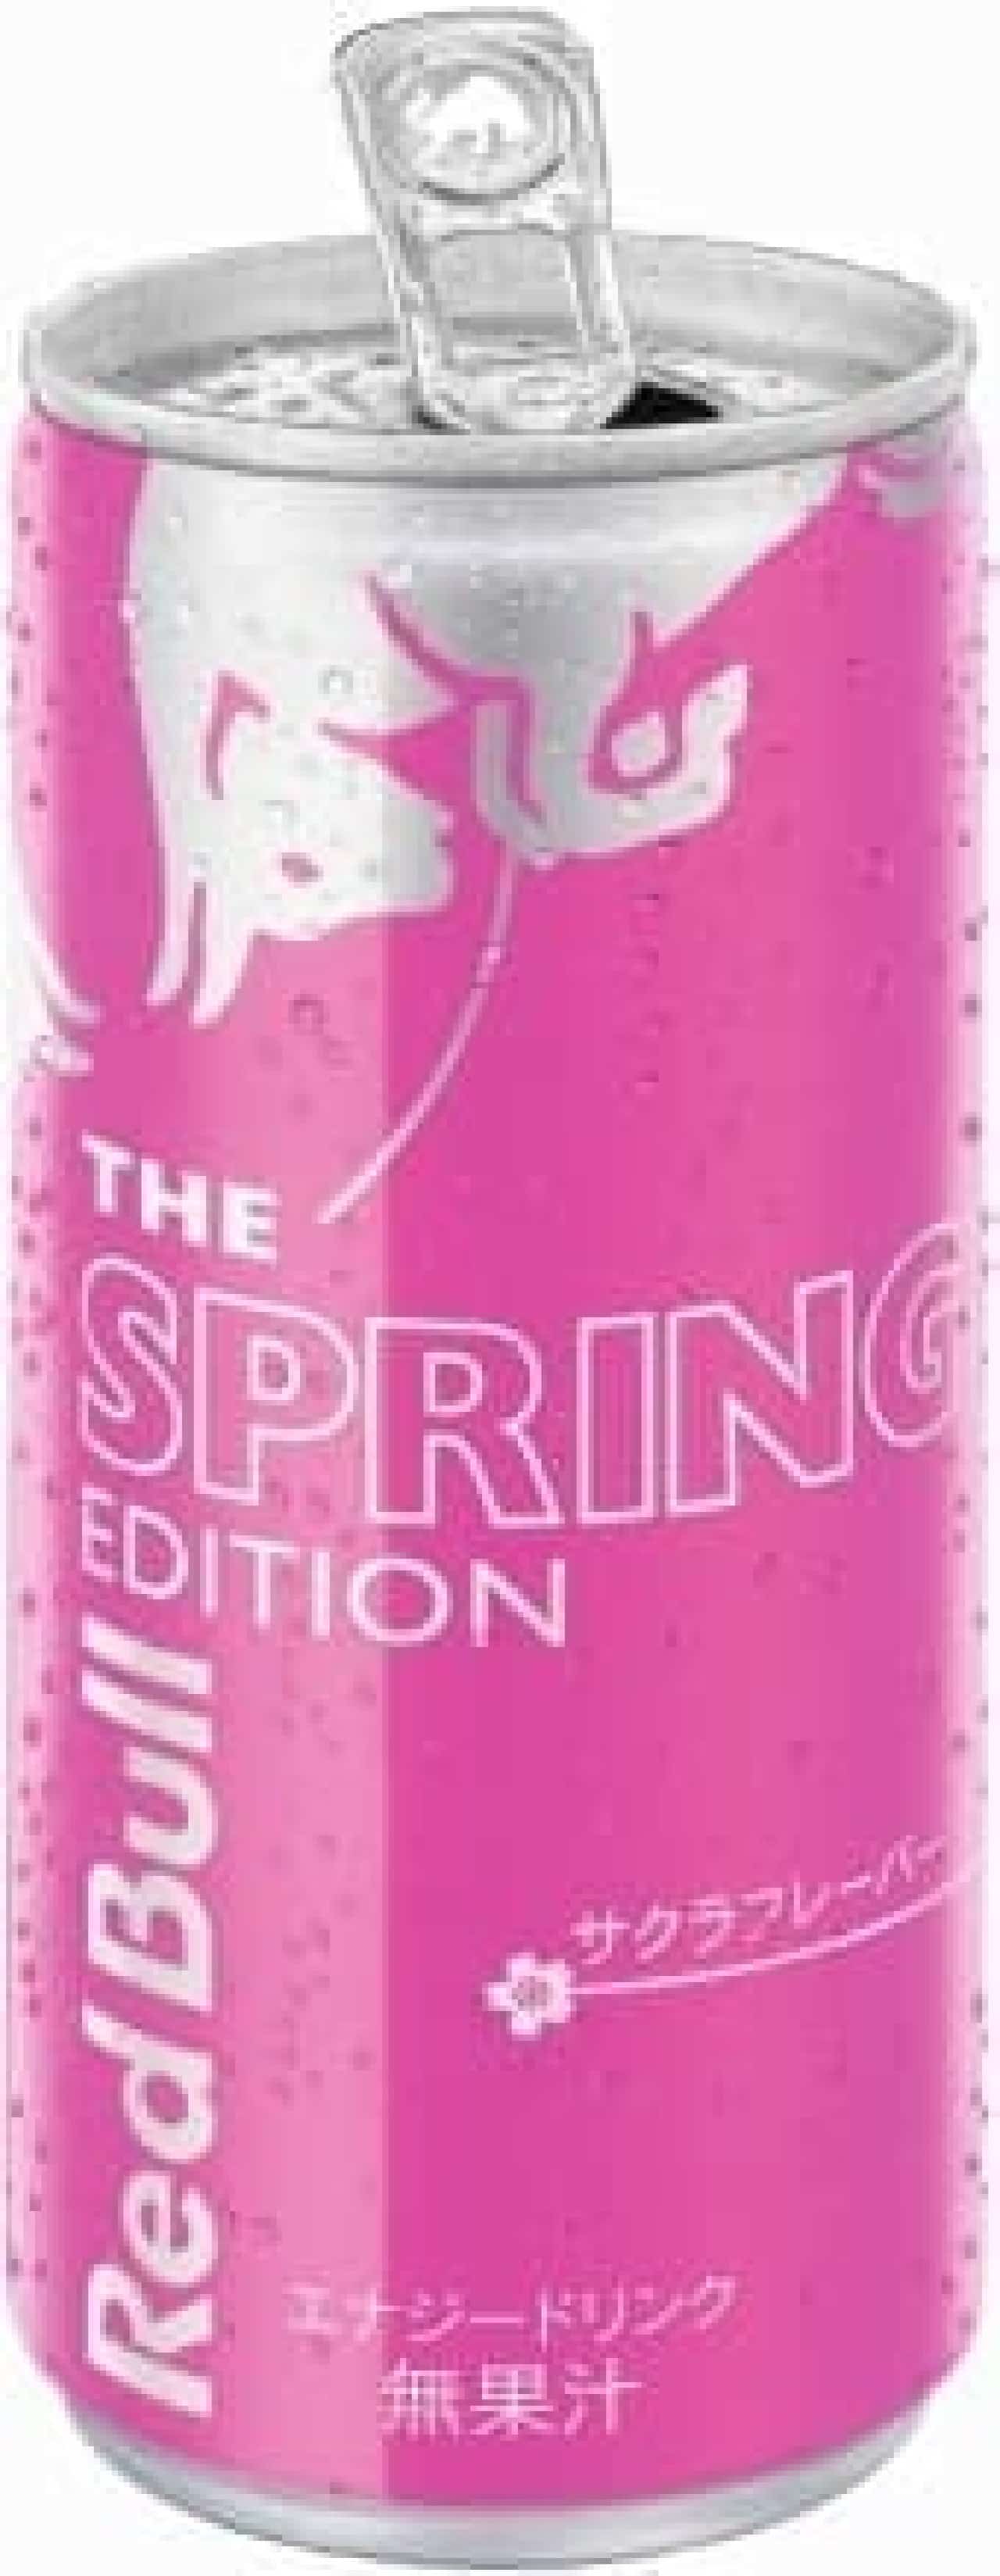 The world's first "Sakura flavor" in Red Bullpink cans, limited to